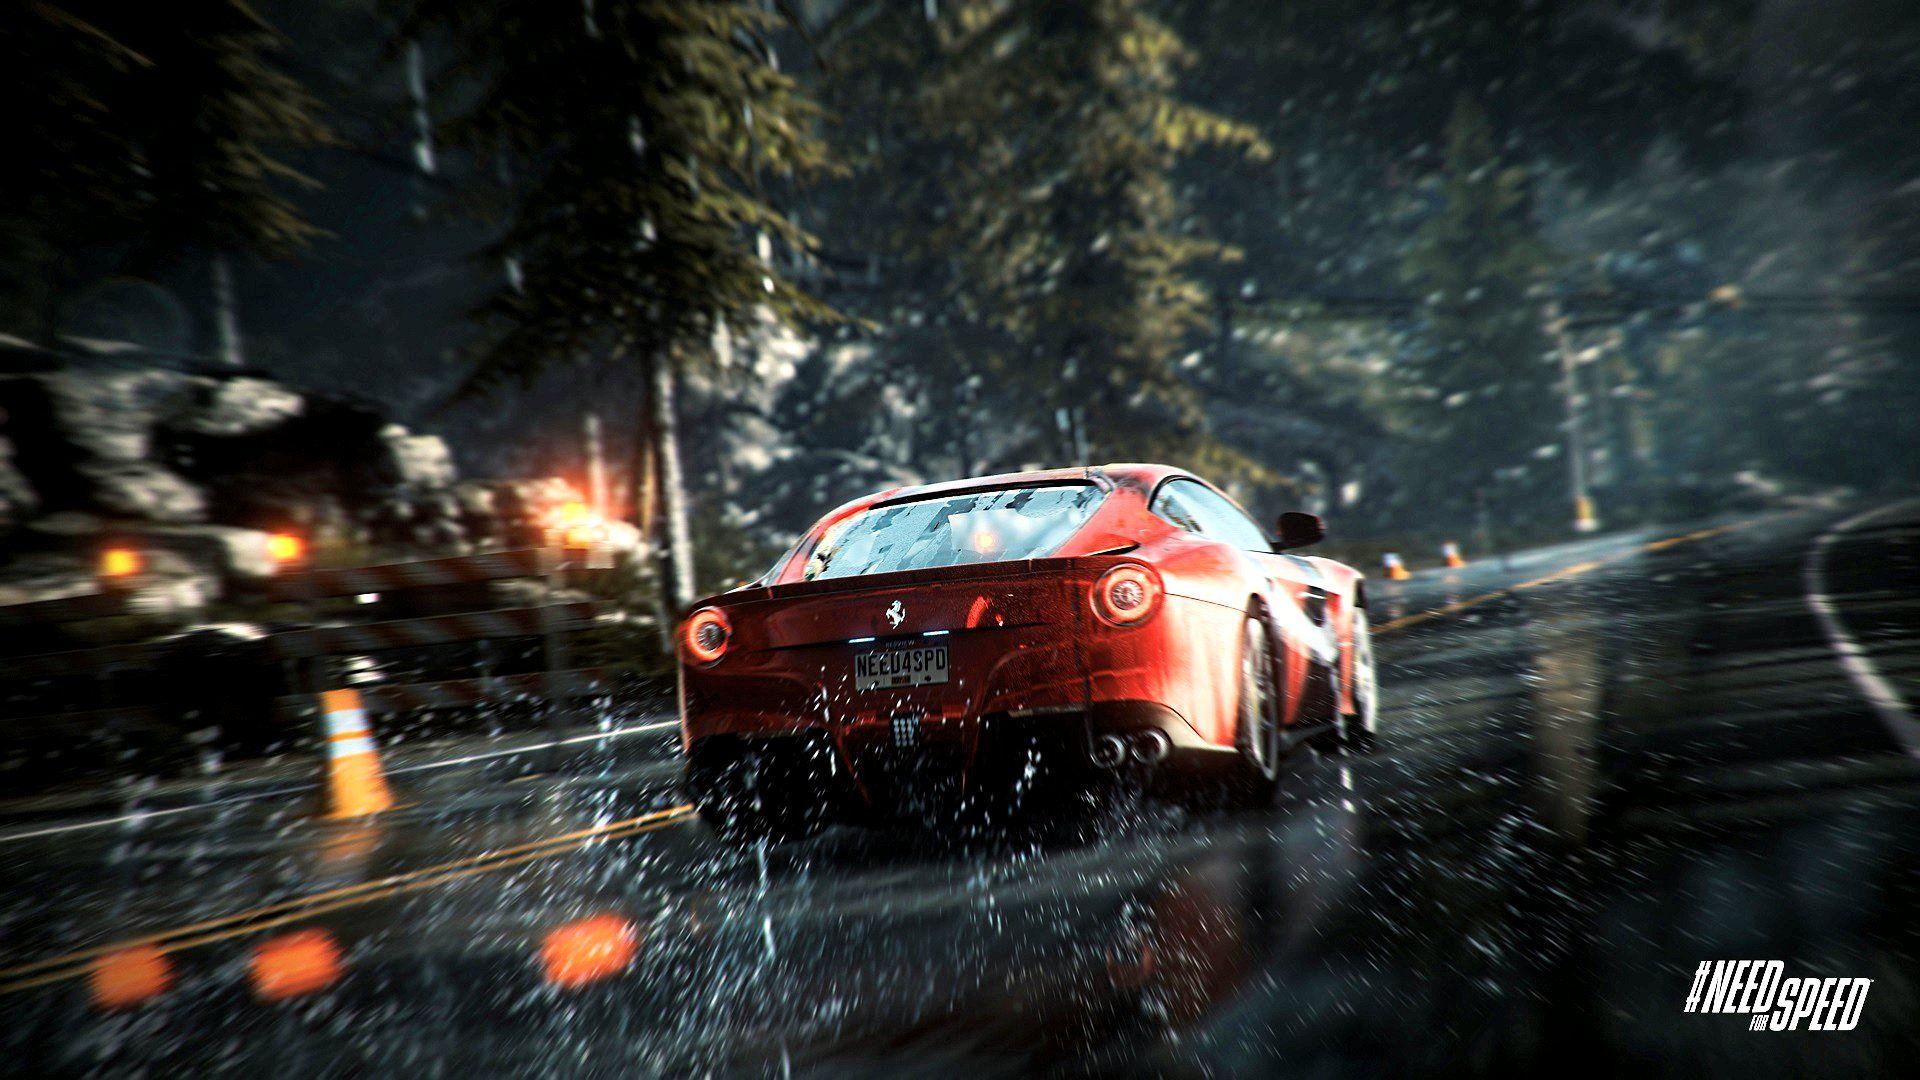 Need For Speed Wallpaper 40294 1920x1080 px